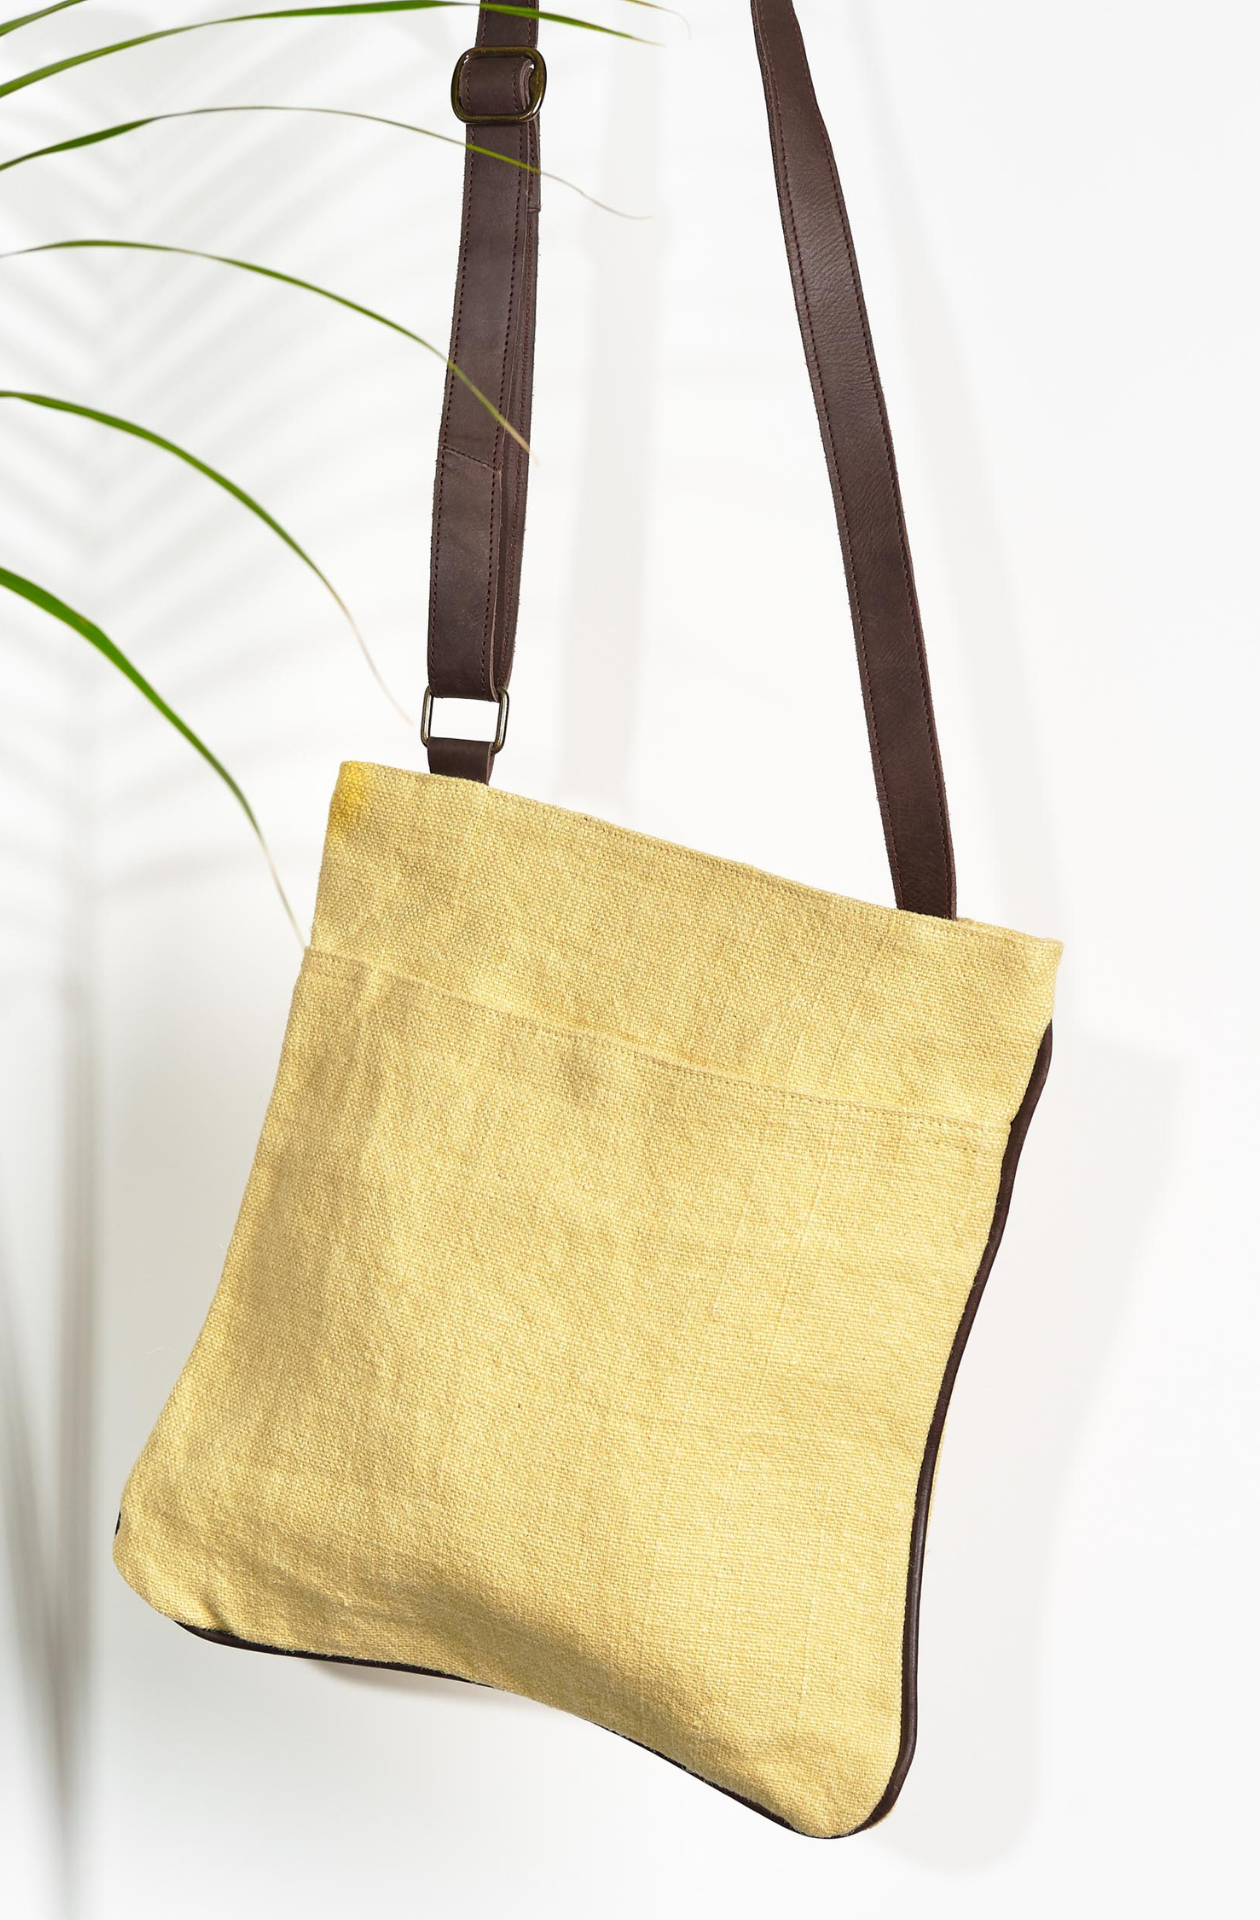 The "Daffodil" variant of the Hold Me Close Cross Body Bag. It is a baby yellow with an open front pocket, with matching brown leather piping around the outside edge. An adjustable dark brown strap is connected on either side of the bag.